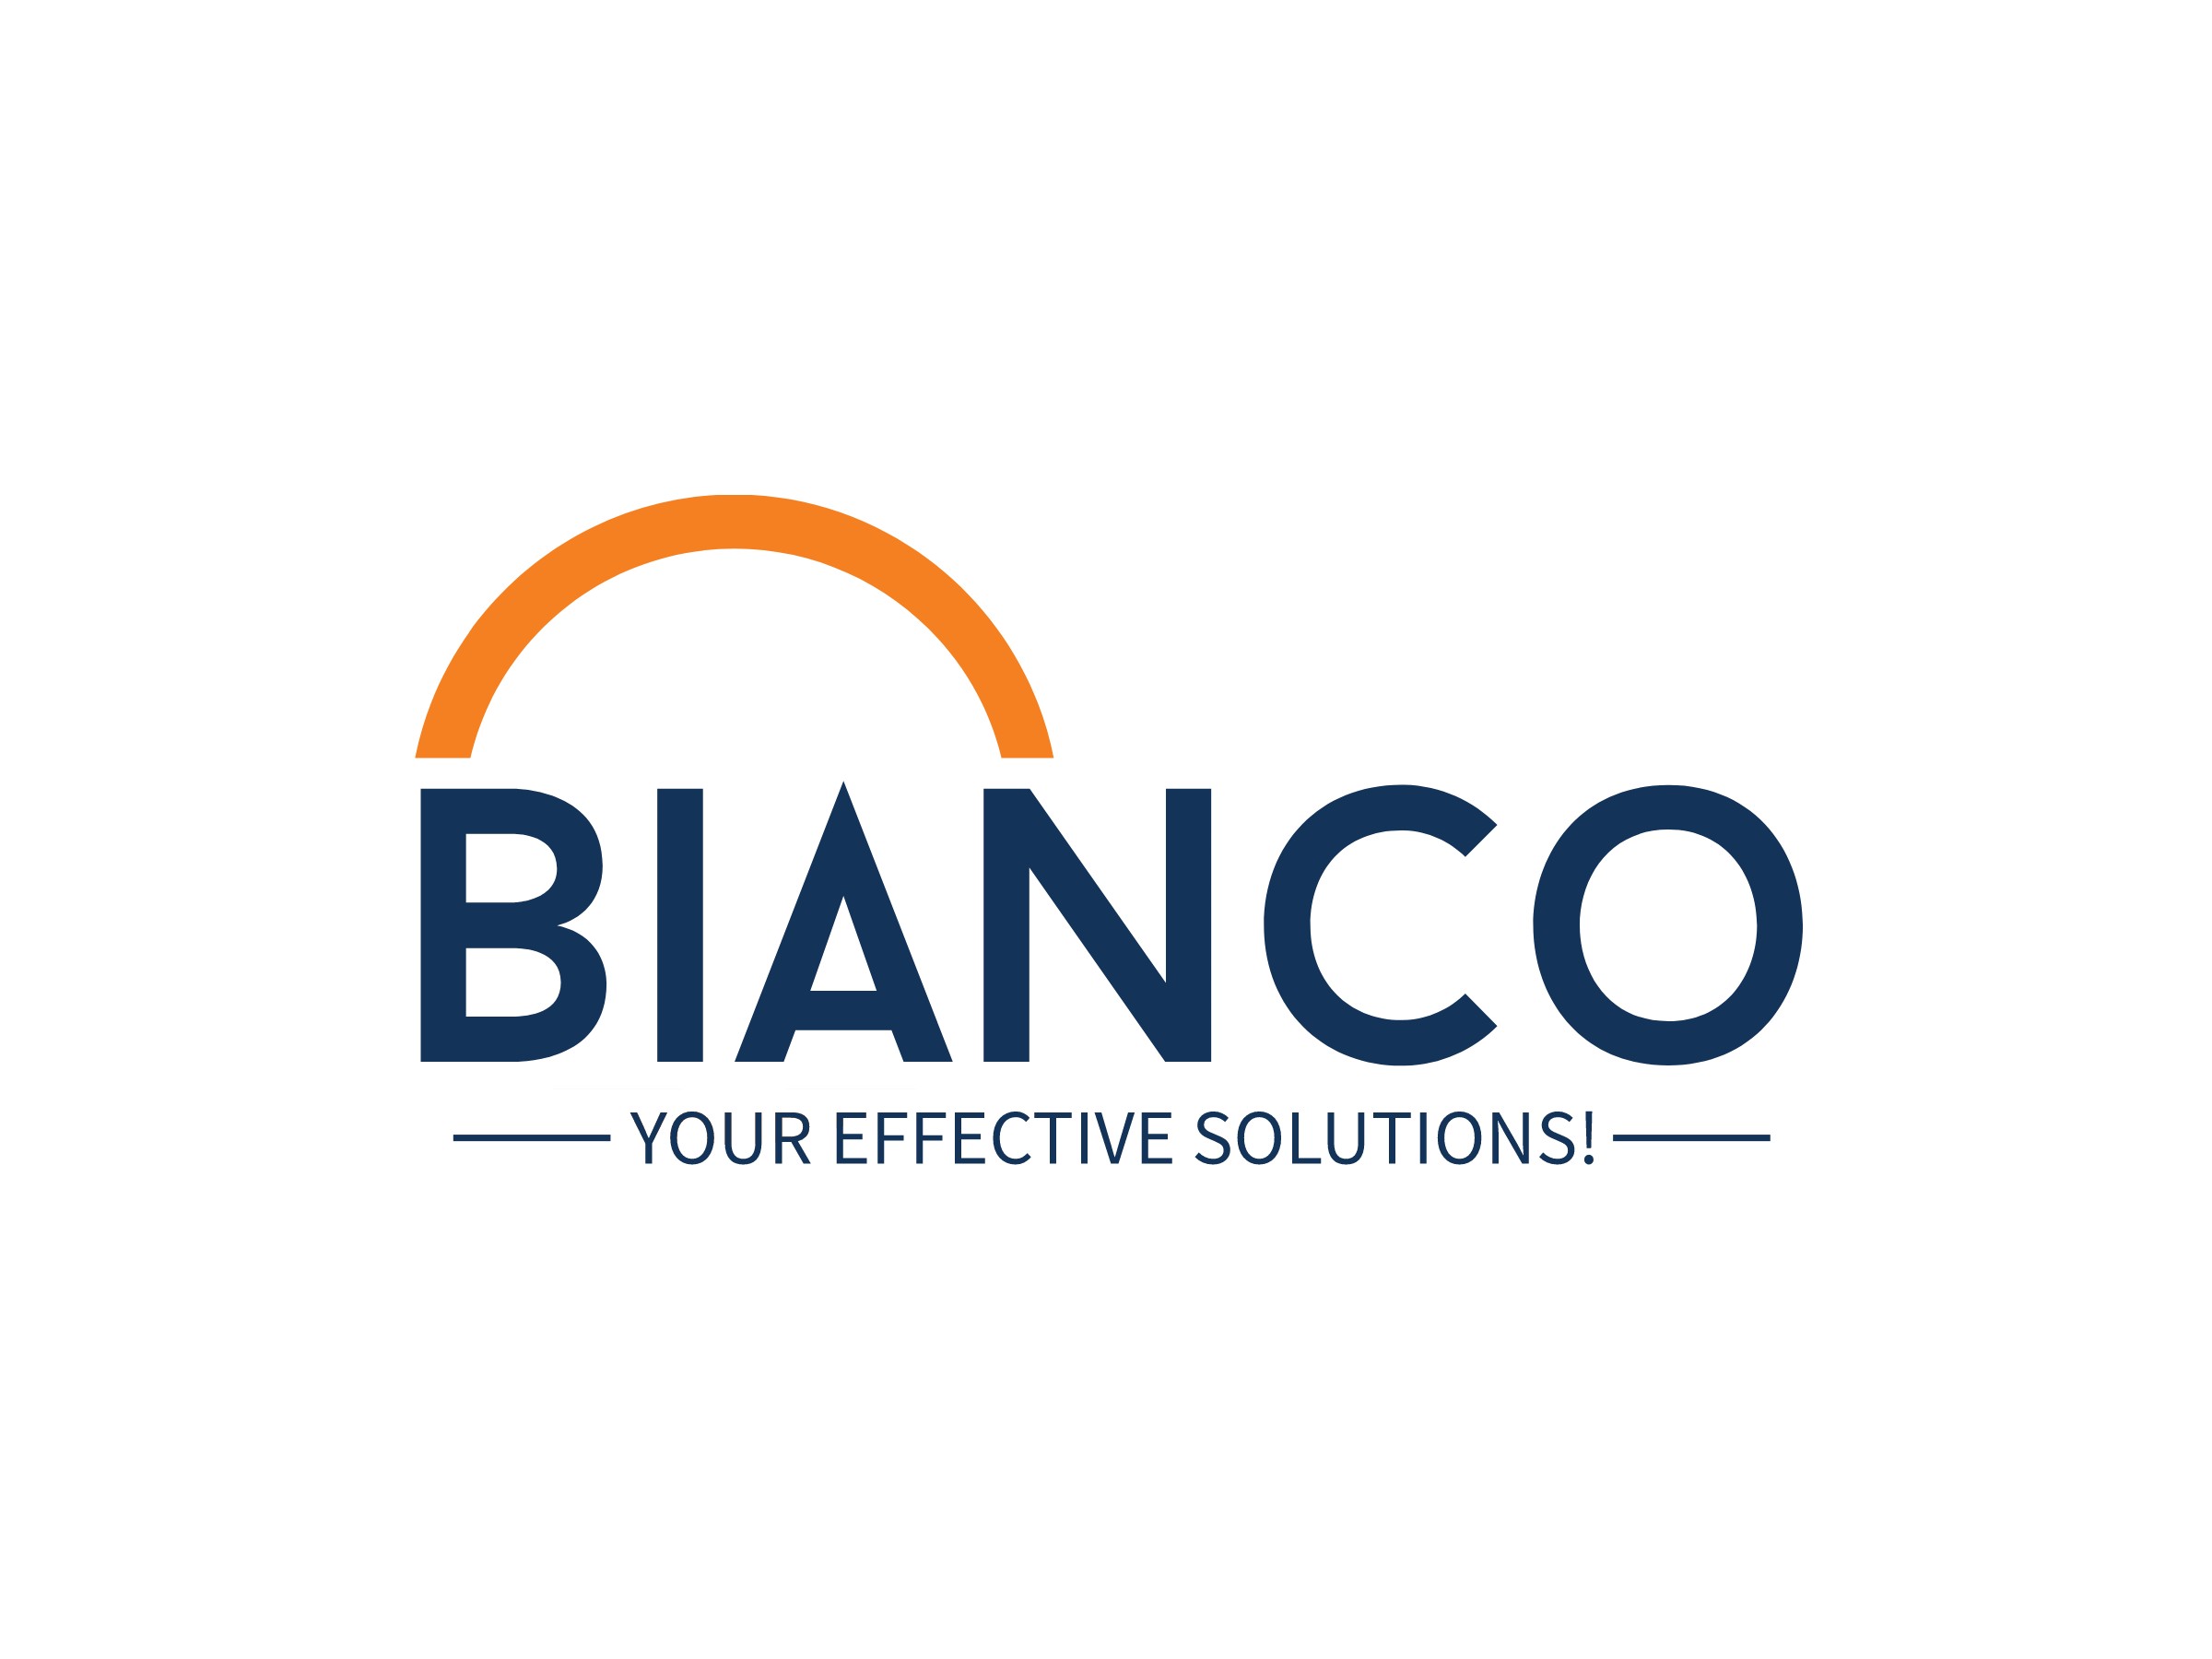 Bianco - Your effective solutions!